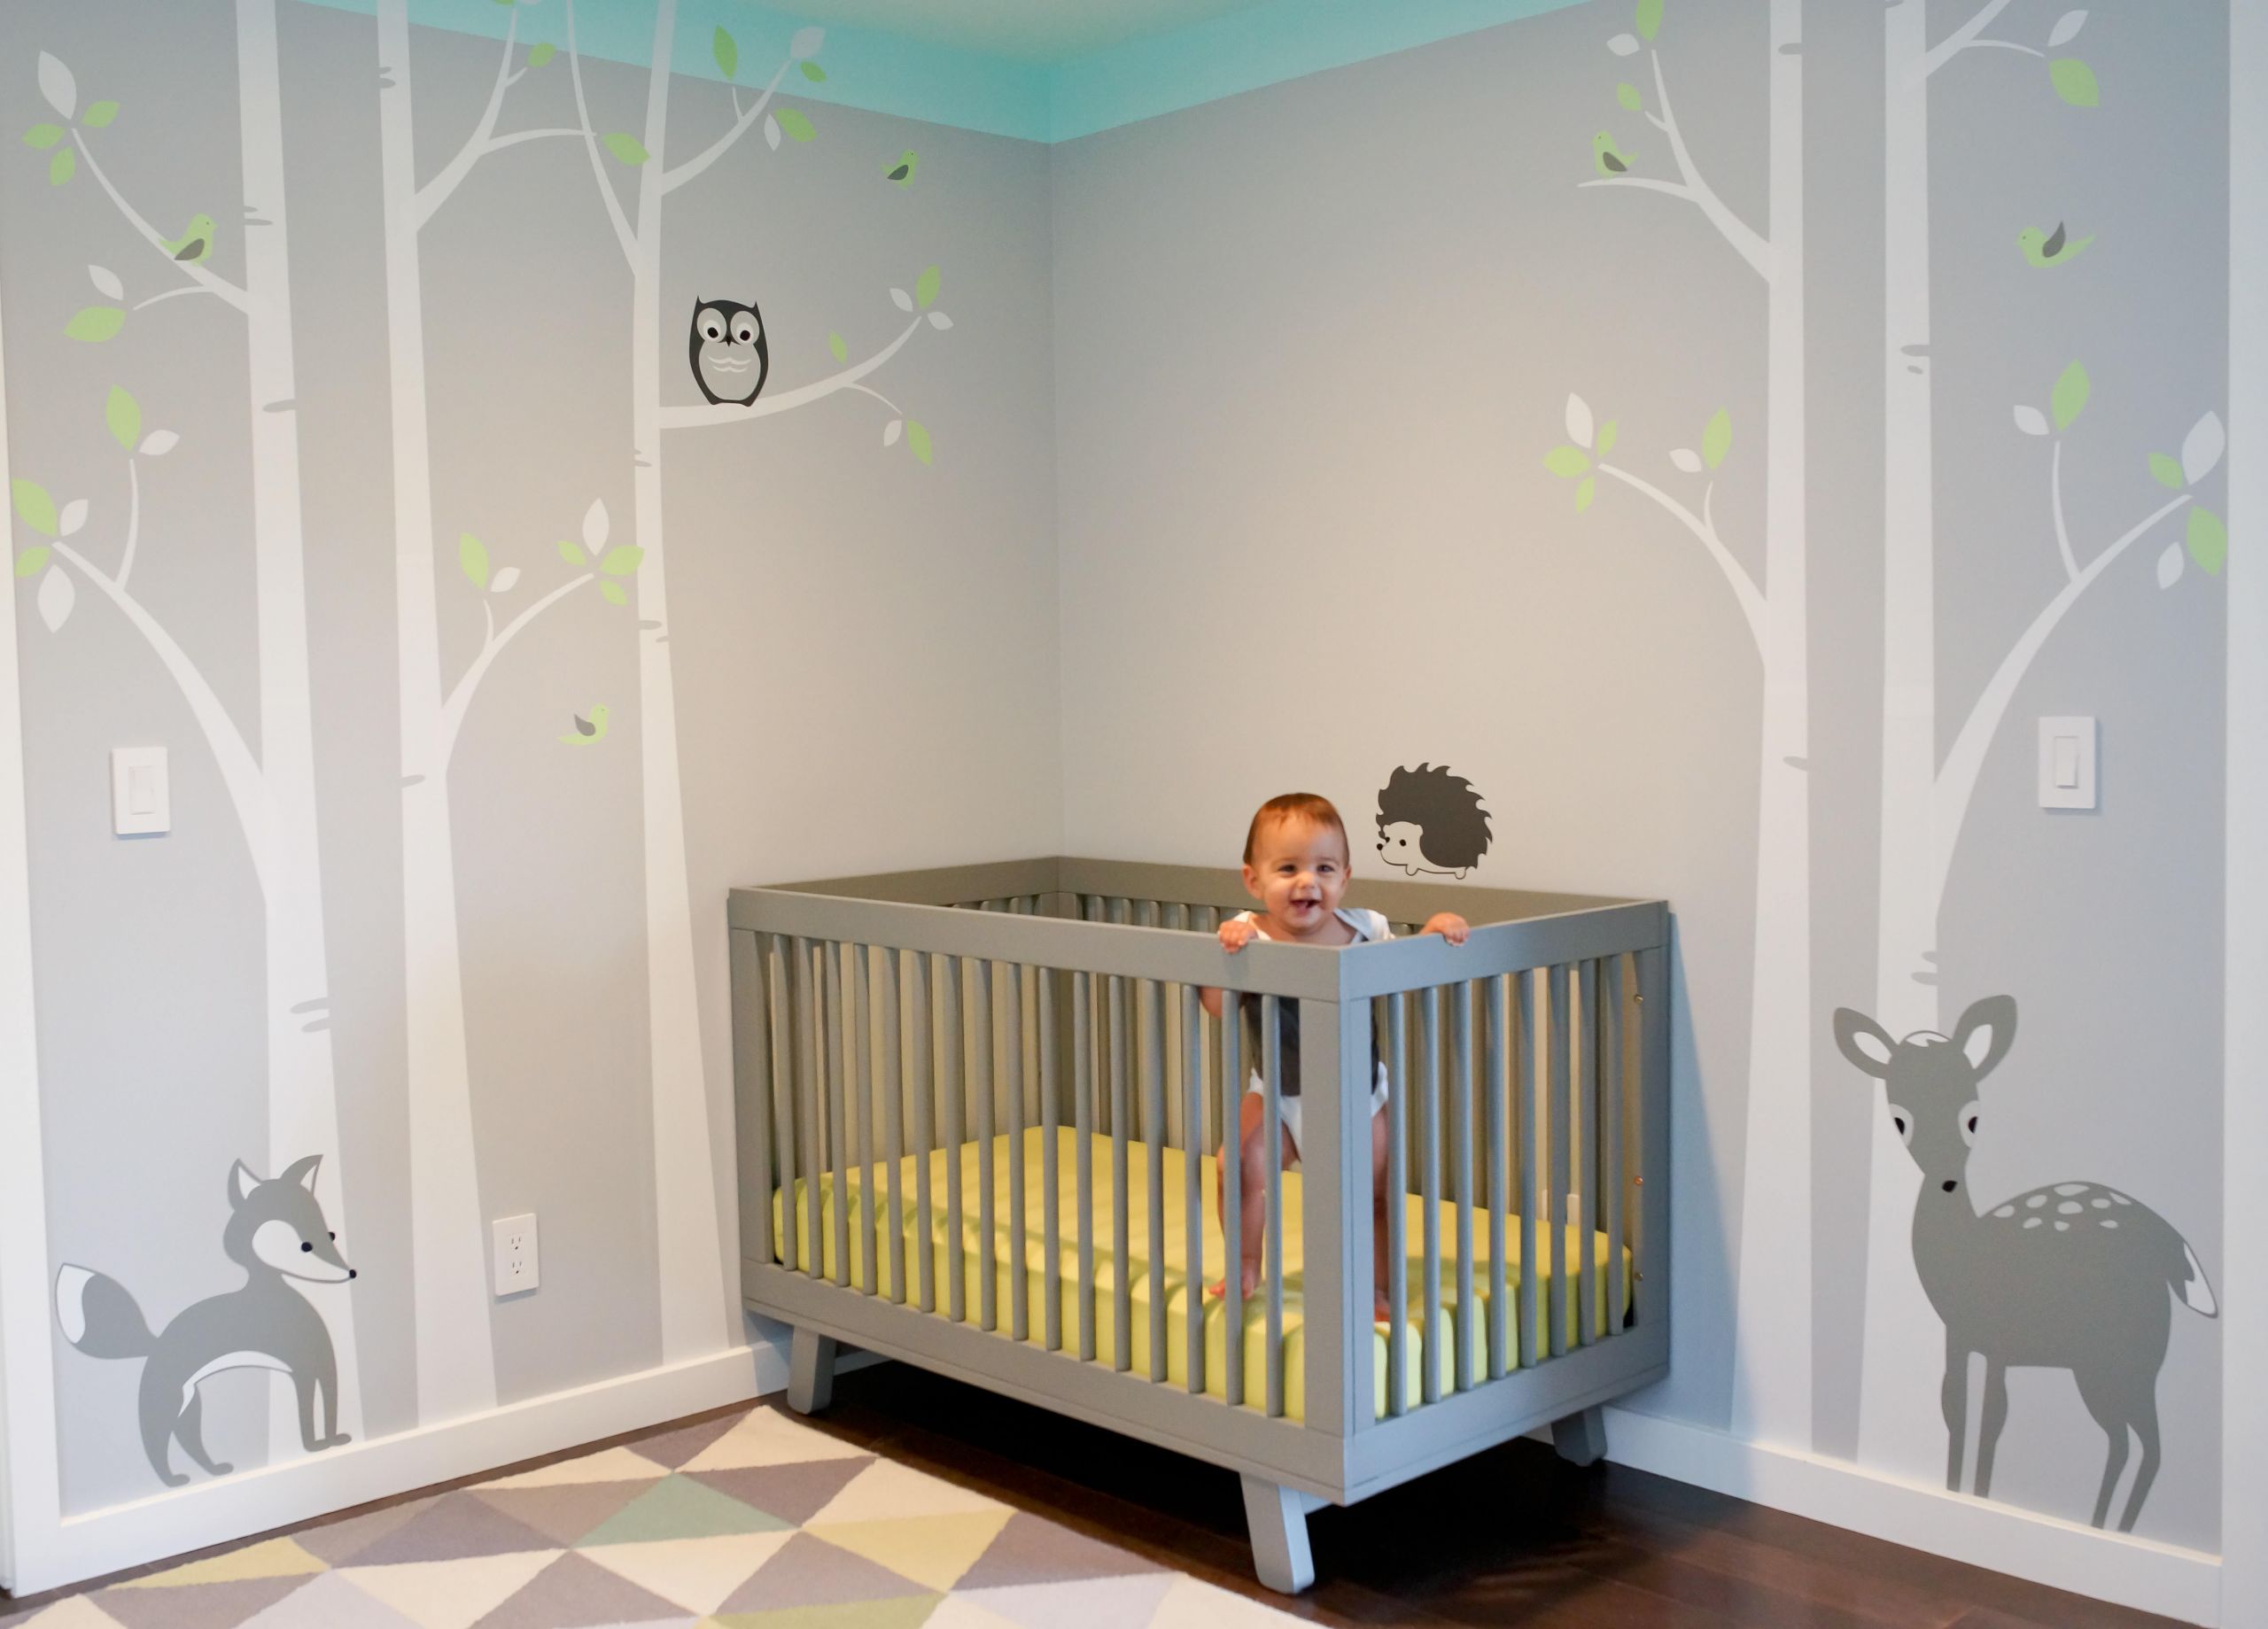 Wall Decorations For Baby Boy Room
 13 Wall Designs Decor Ideas For Nursery